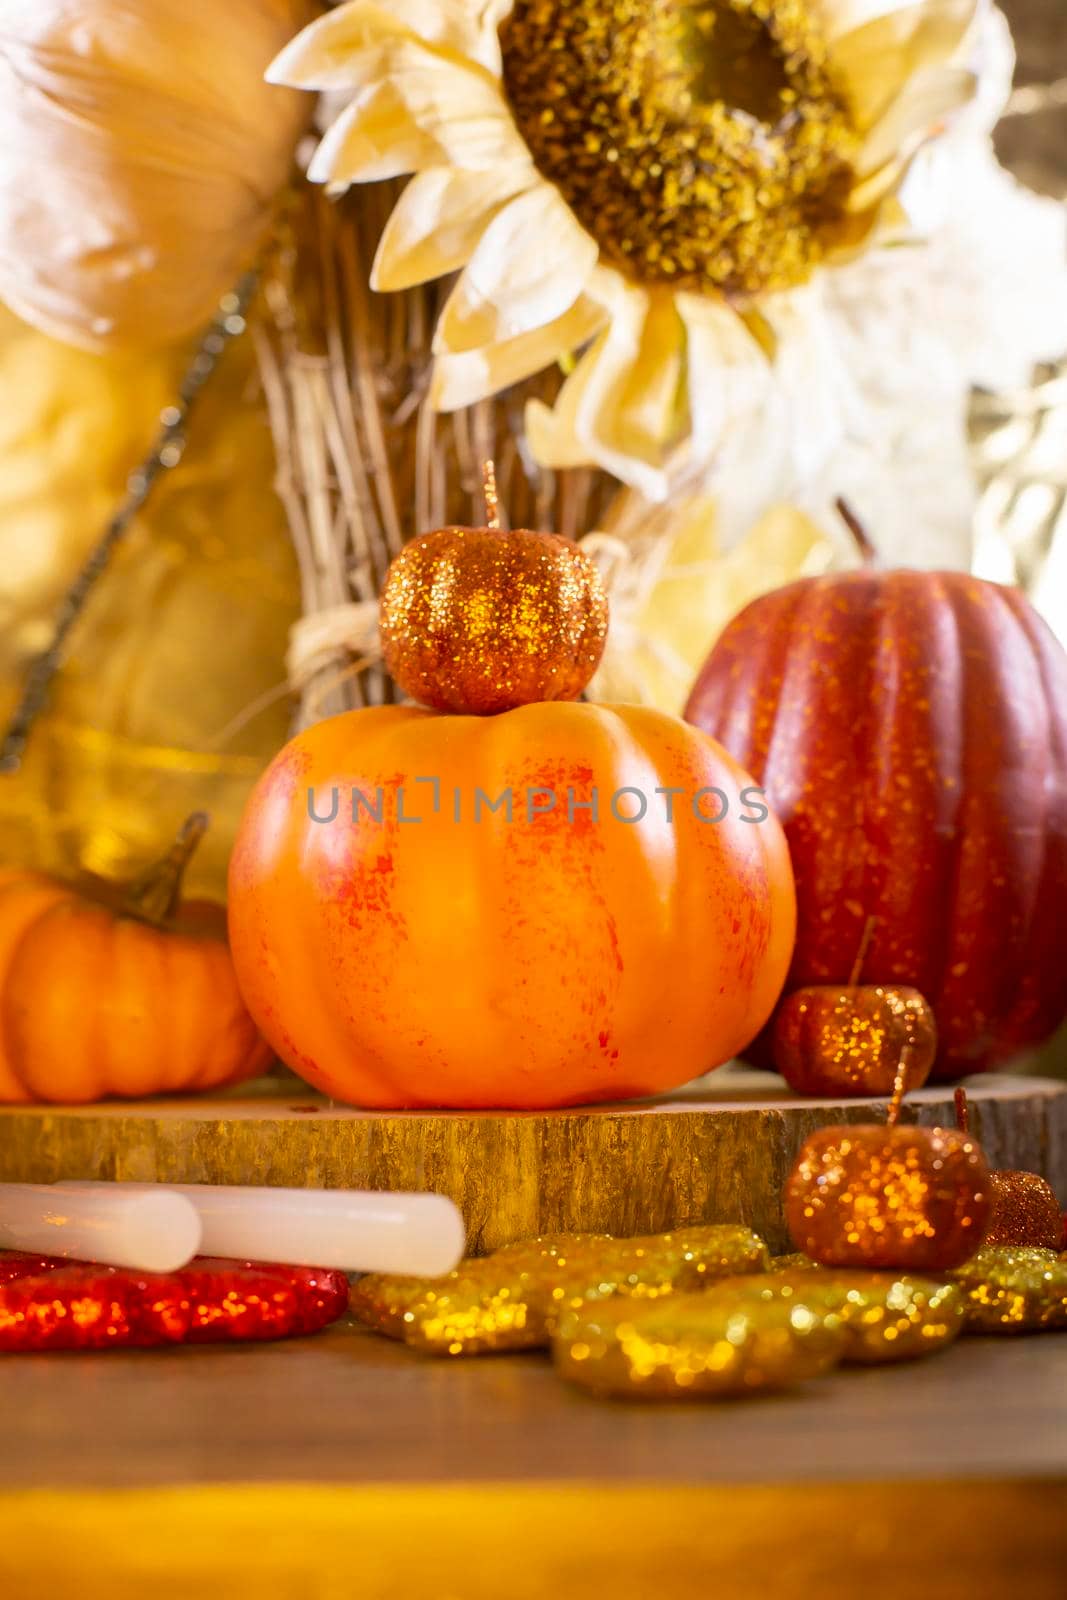 Small orange pumpkins, small red pumpkin, small orange glitter pumpkins, red, yellow, and orange glitter leaves, glue sticks for crafting, and dried sunflowers against a golden background